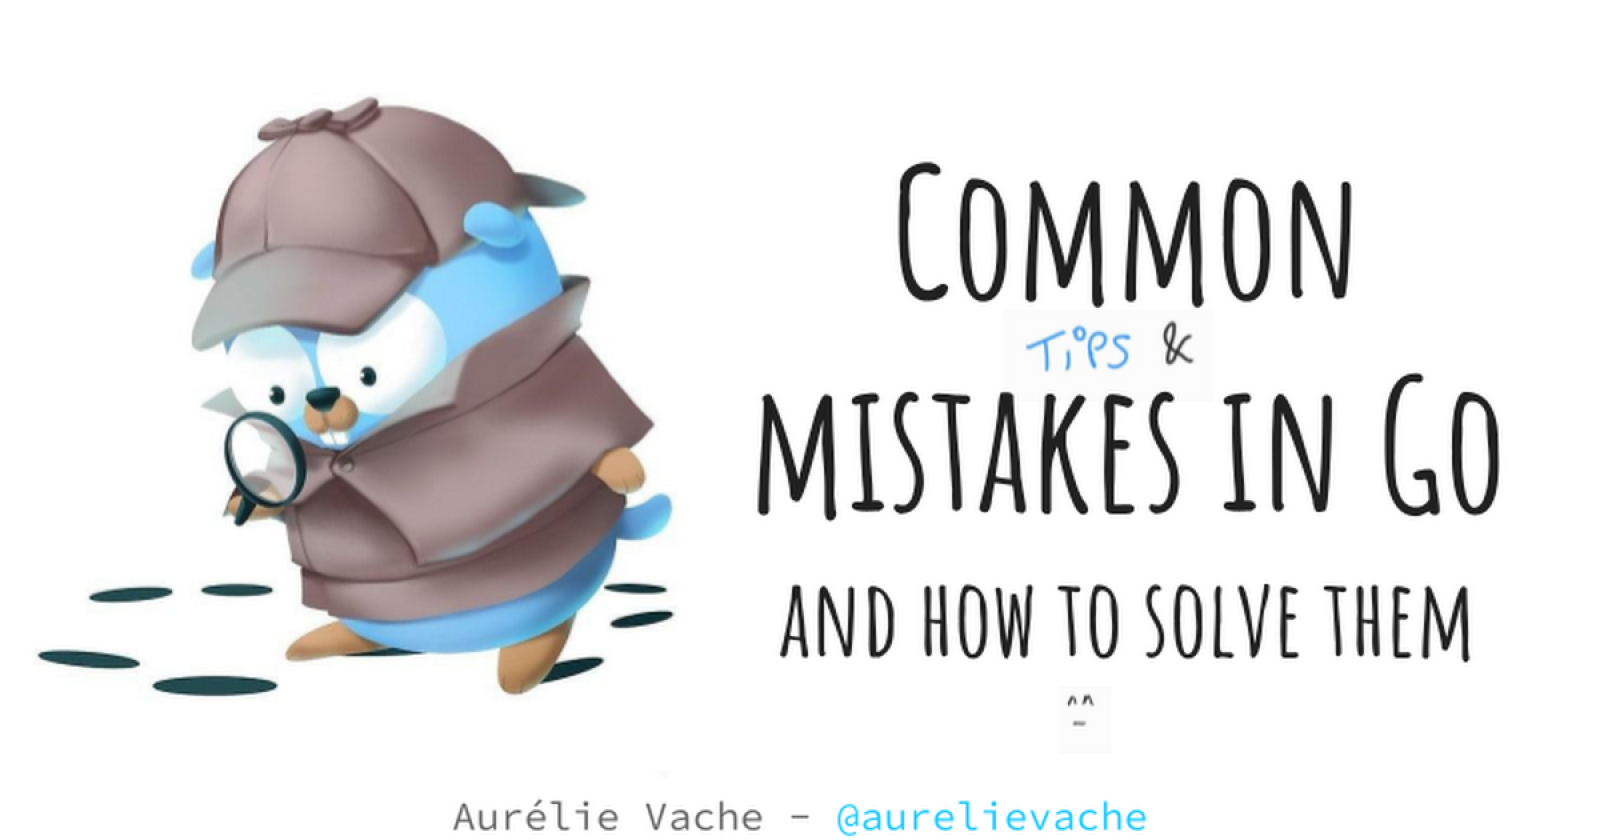 Common tips & mistakes in Go and how to solve them